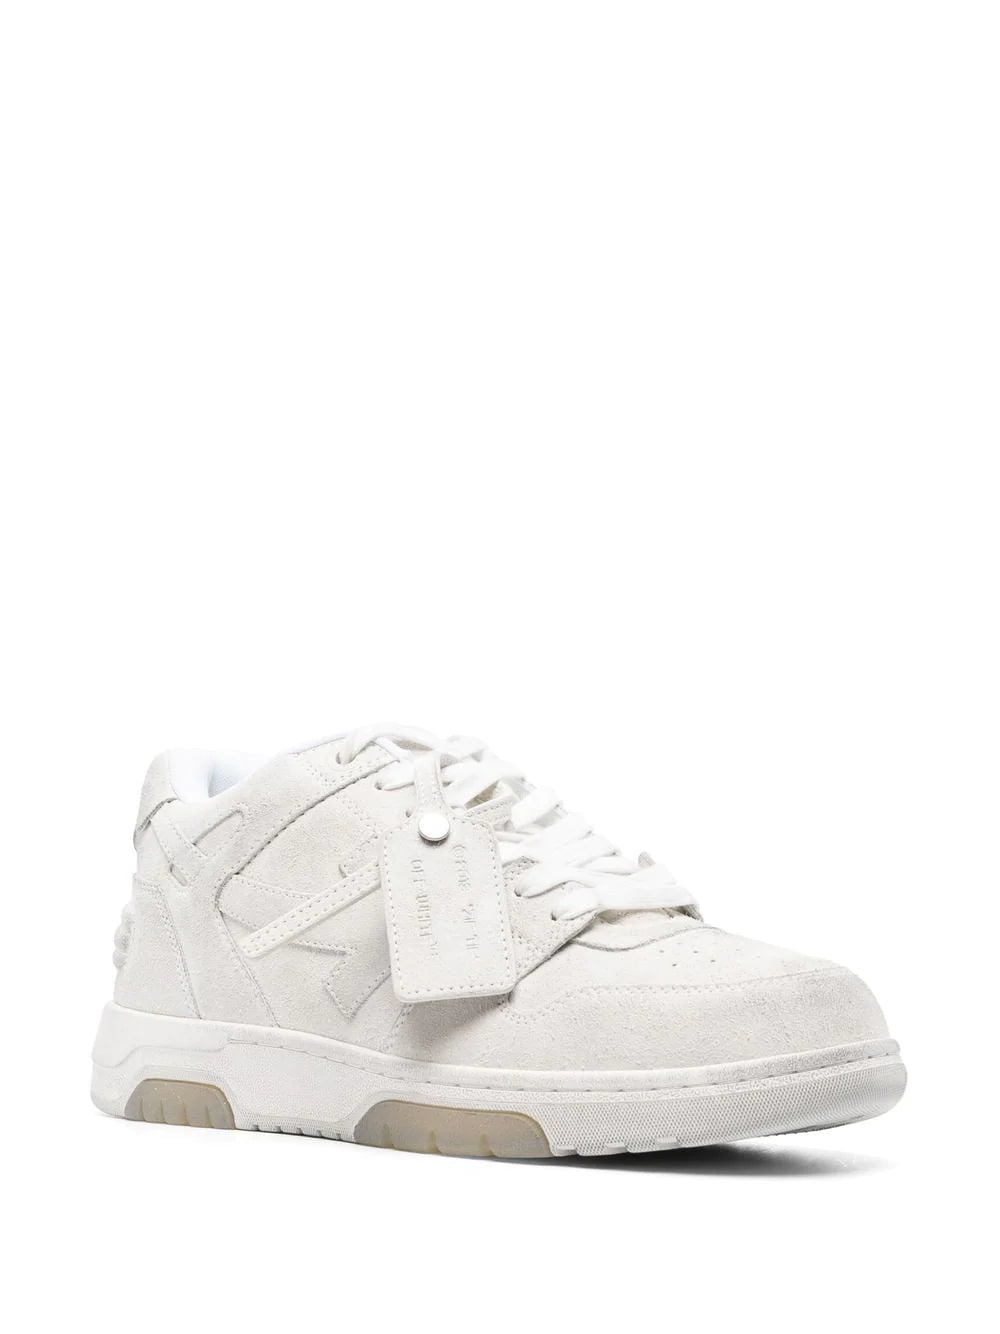 OFF WHITE Sneakers in camoscio panna